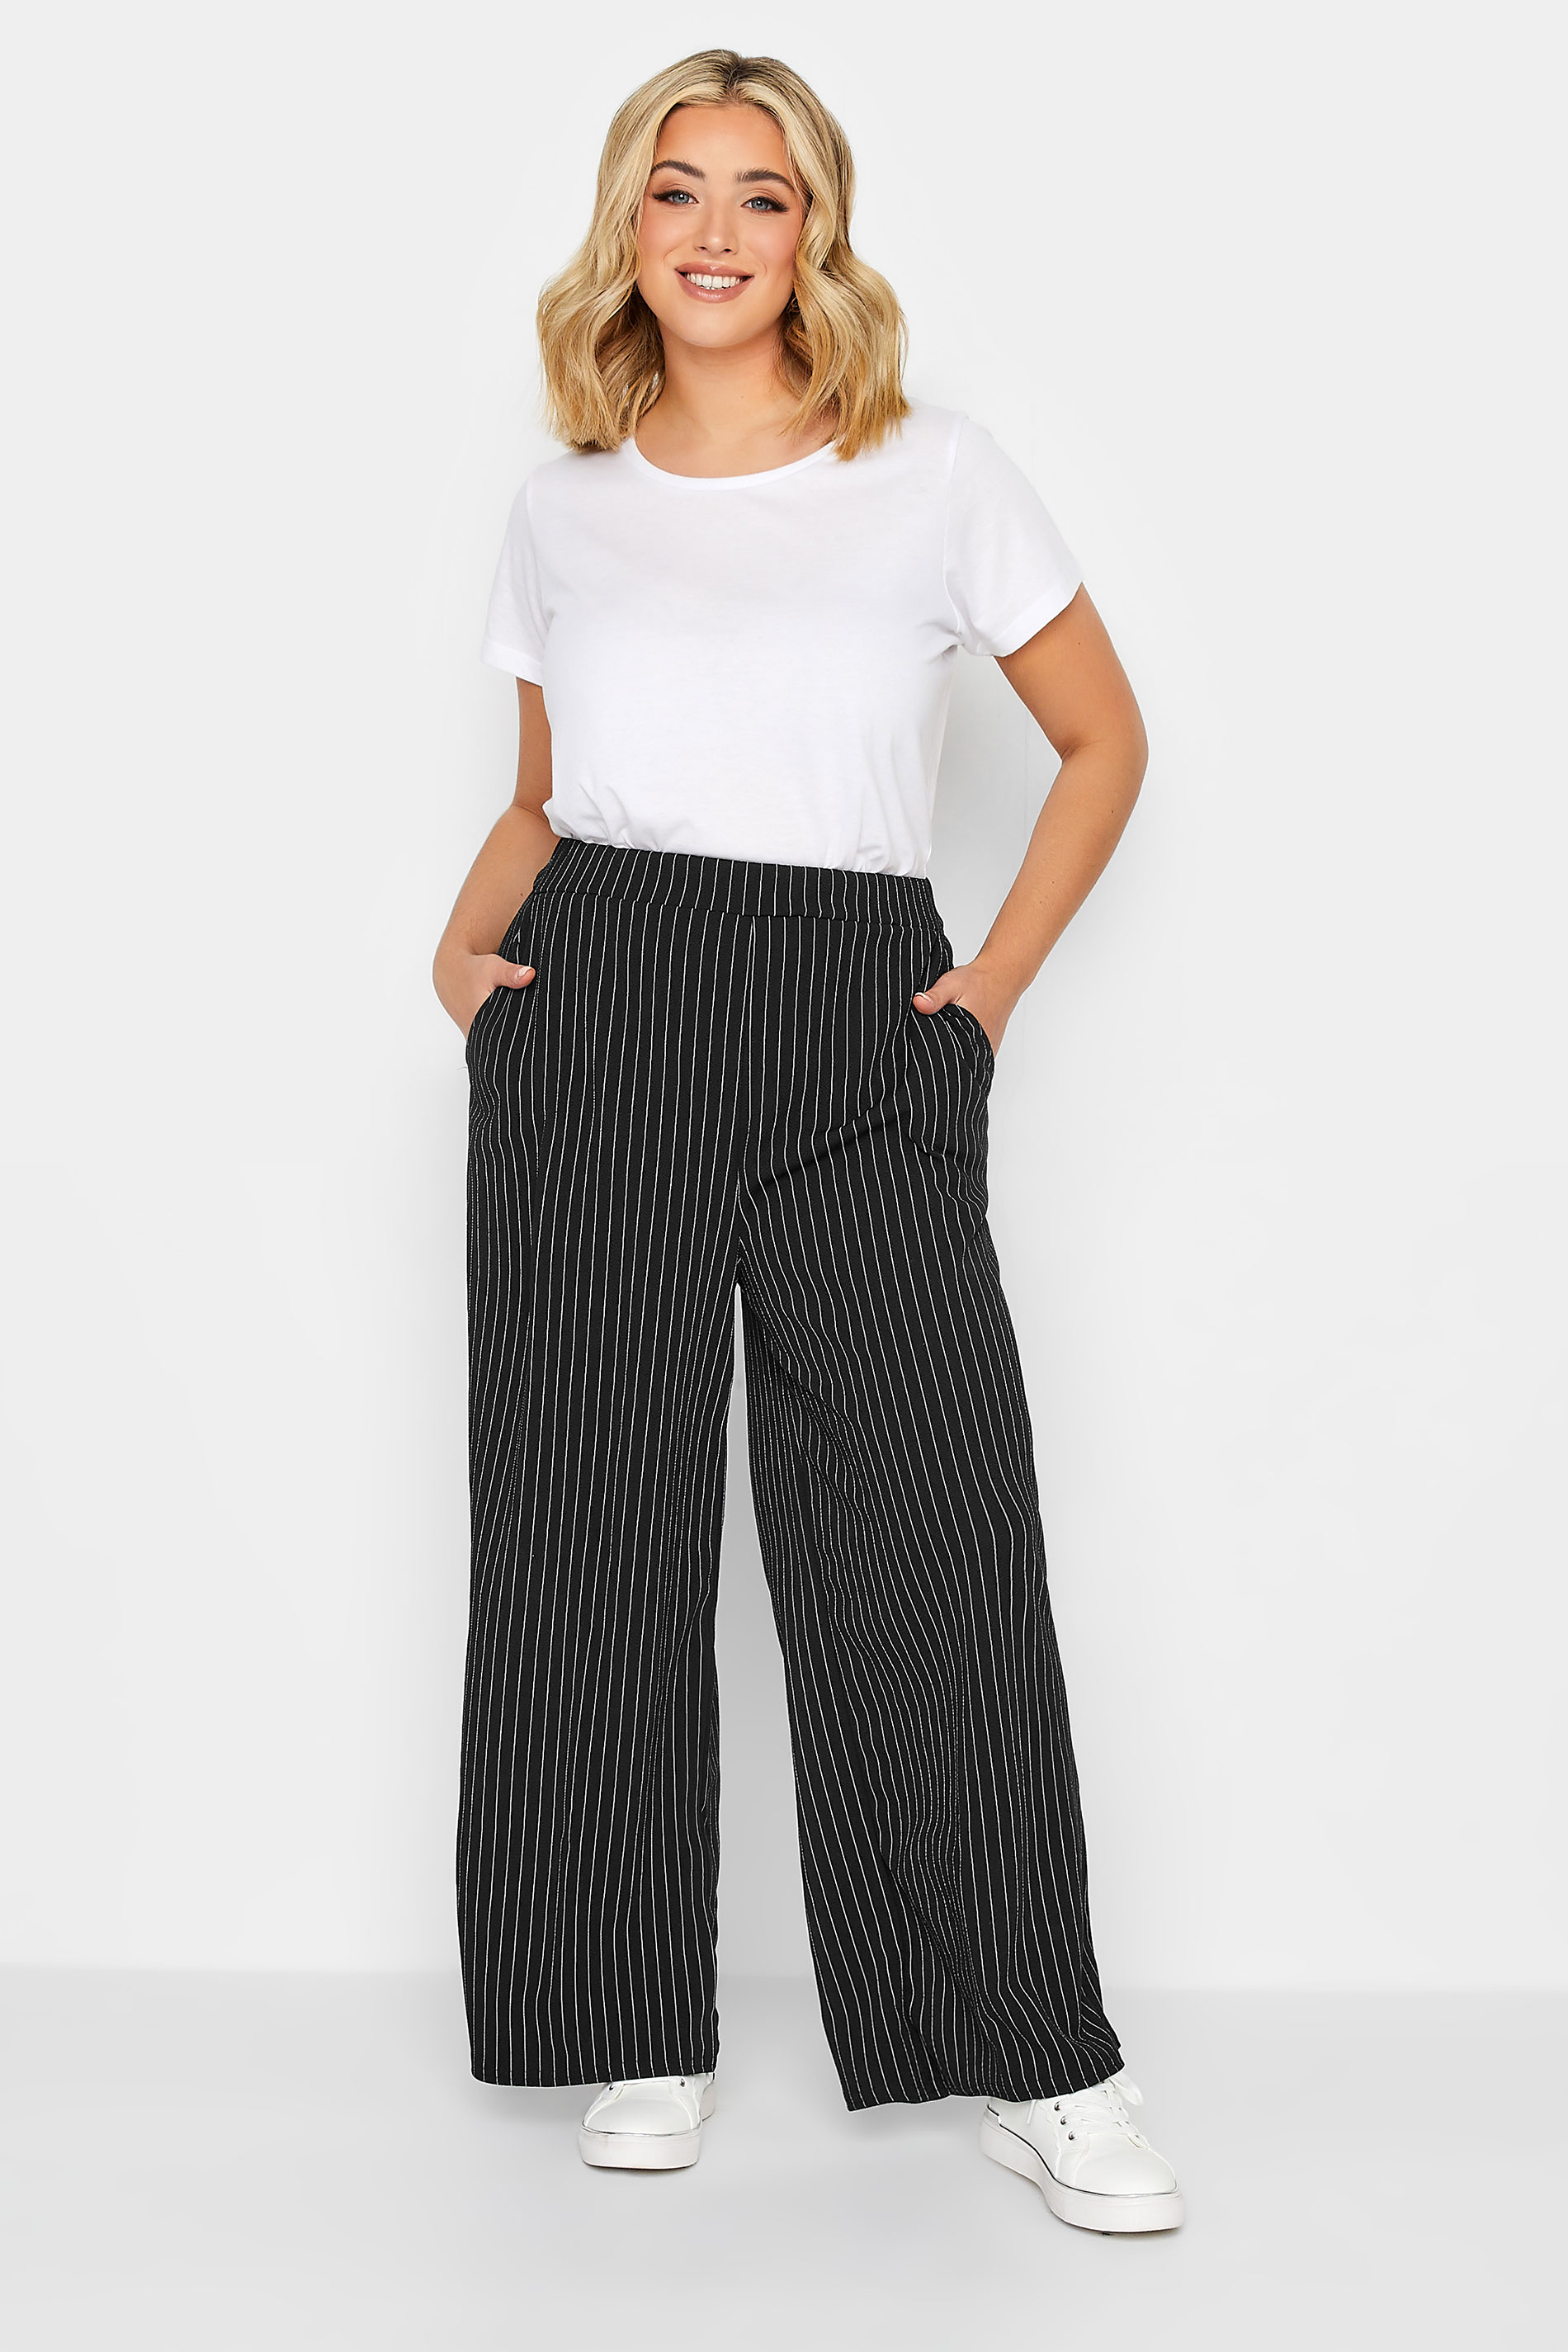 YOURS PETITE Plus Size Black Pinstripe Wide Leg Trousers | Yours Clothing 2